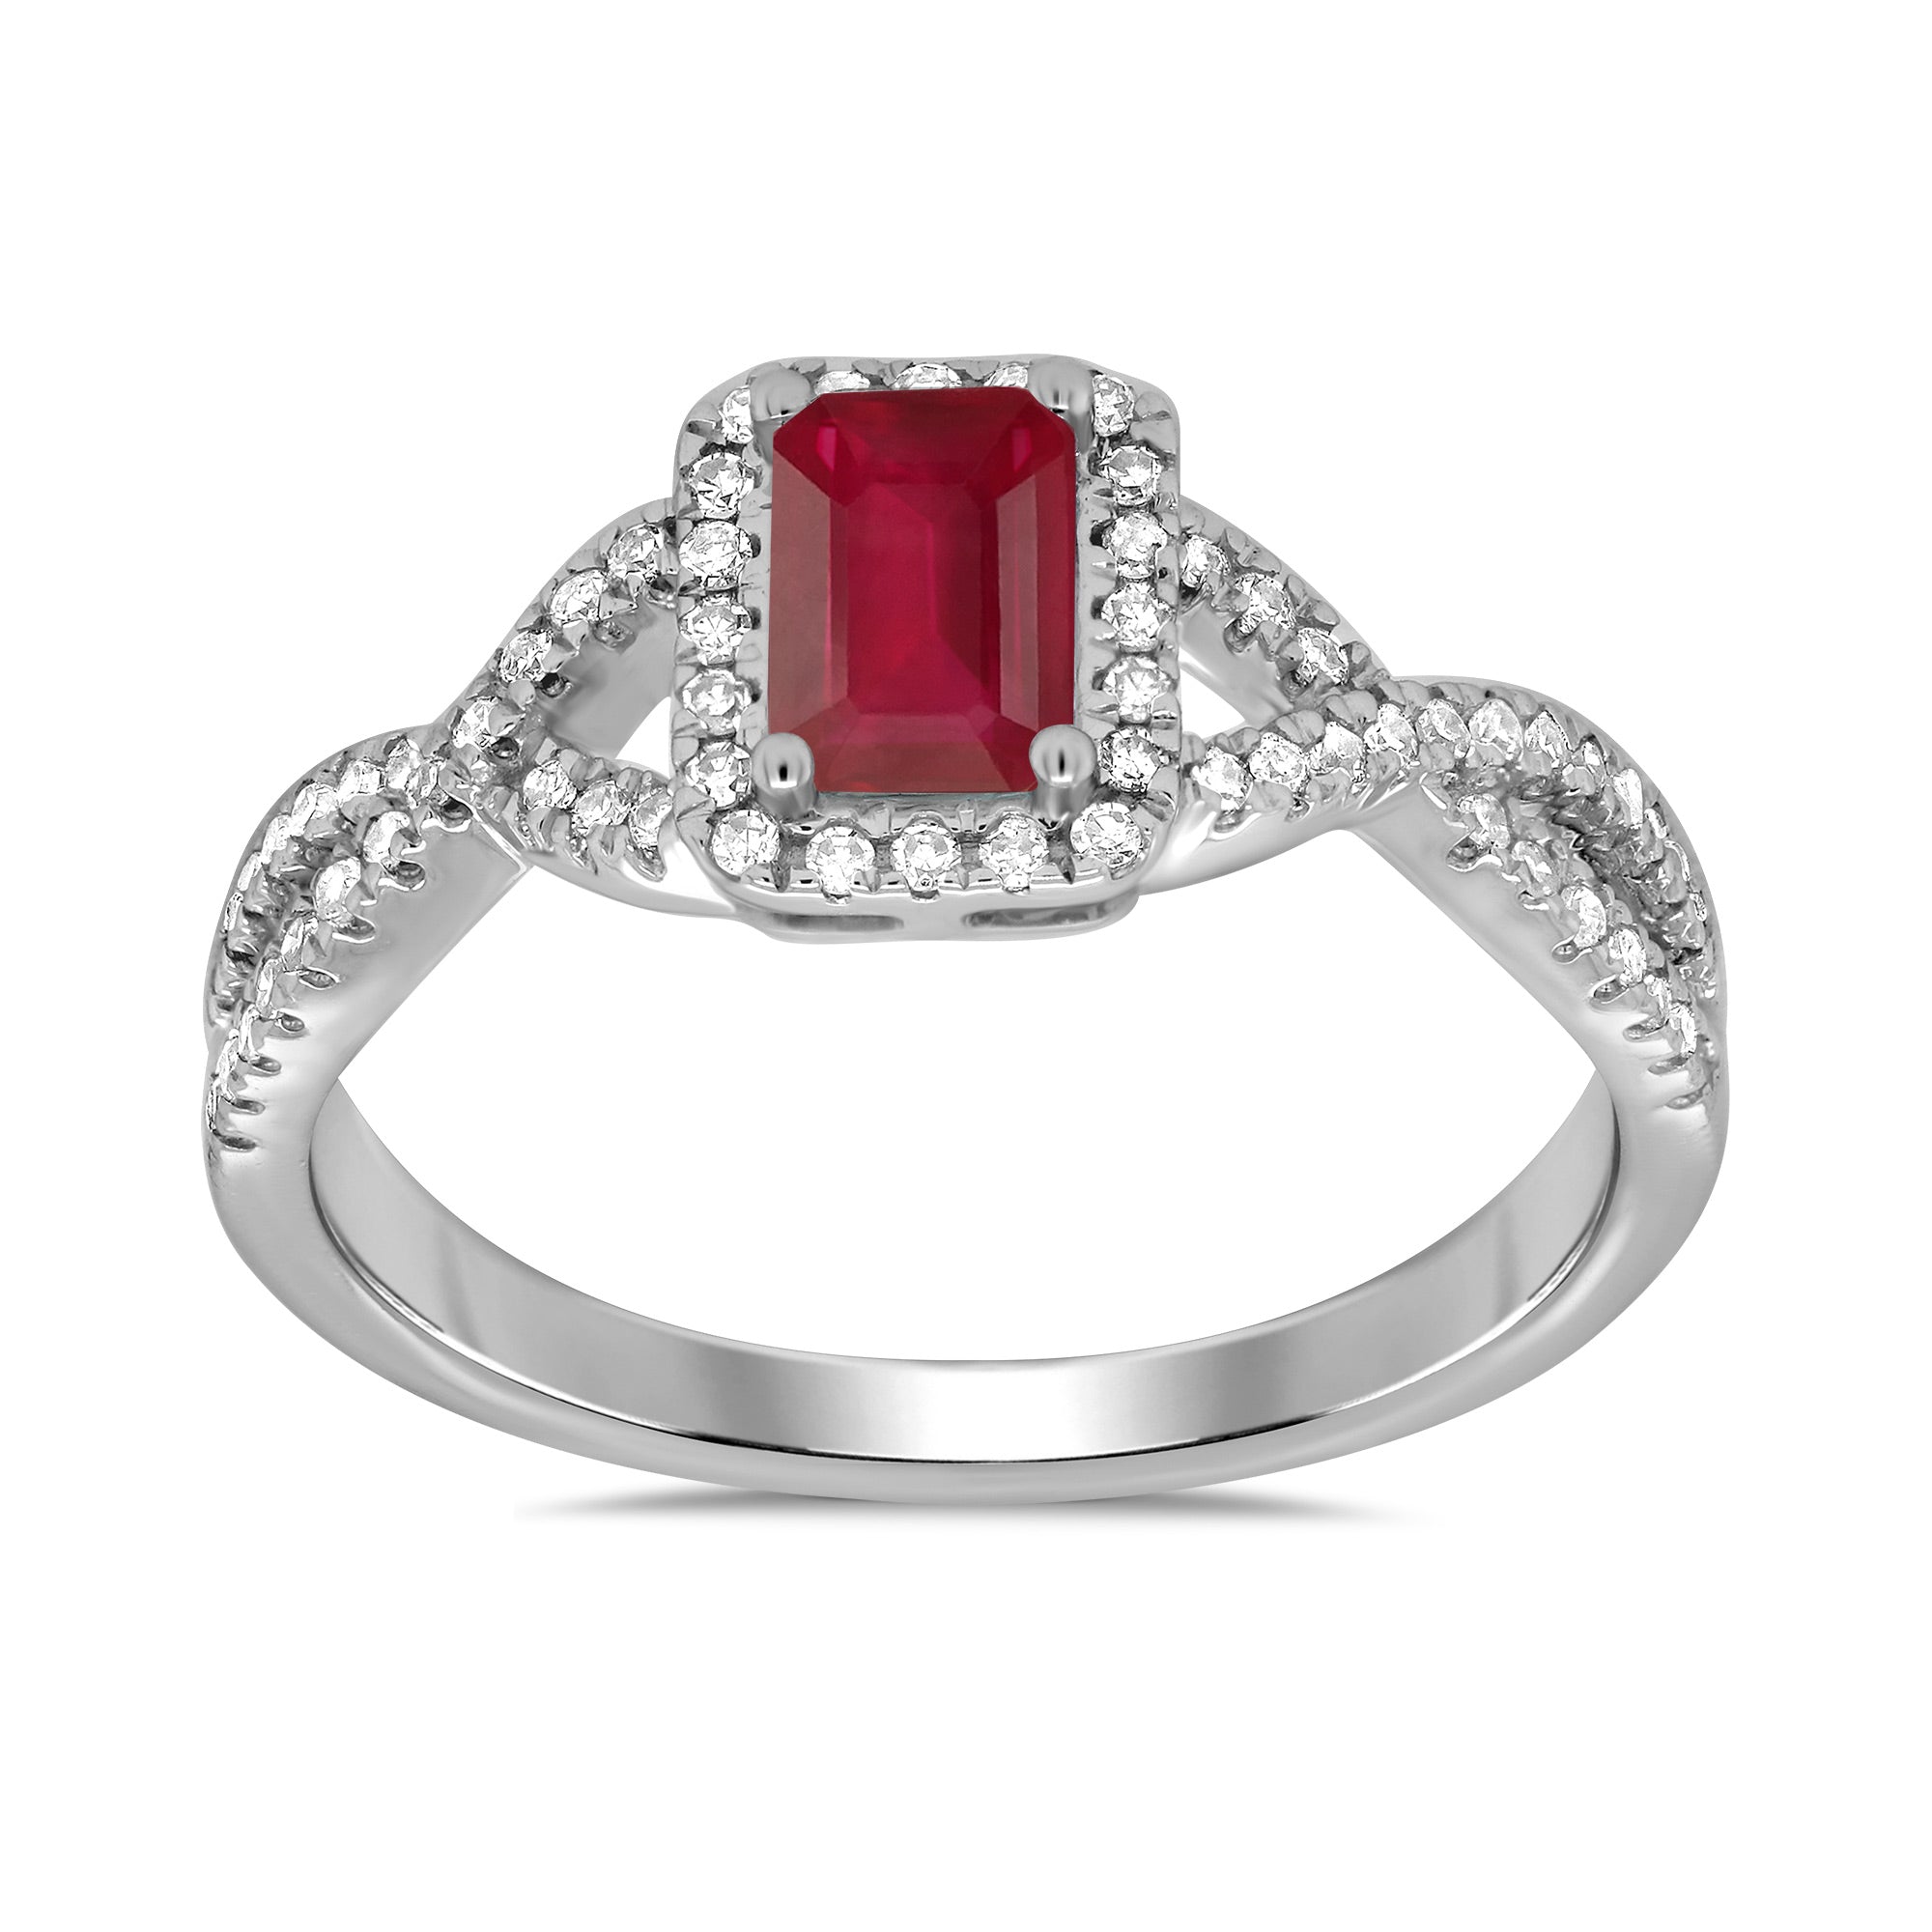 9ct white gold 6x4mm octagon ruby & diamond cluster ring with diamond set crossover shoulders 0.21ct